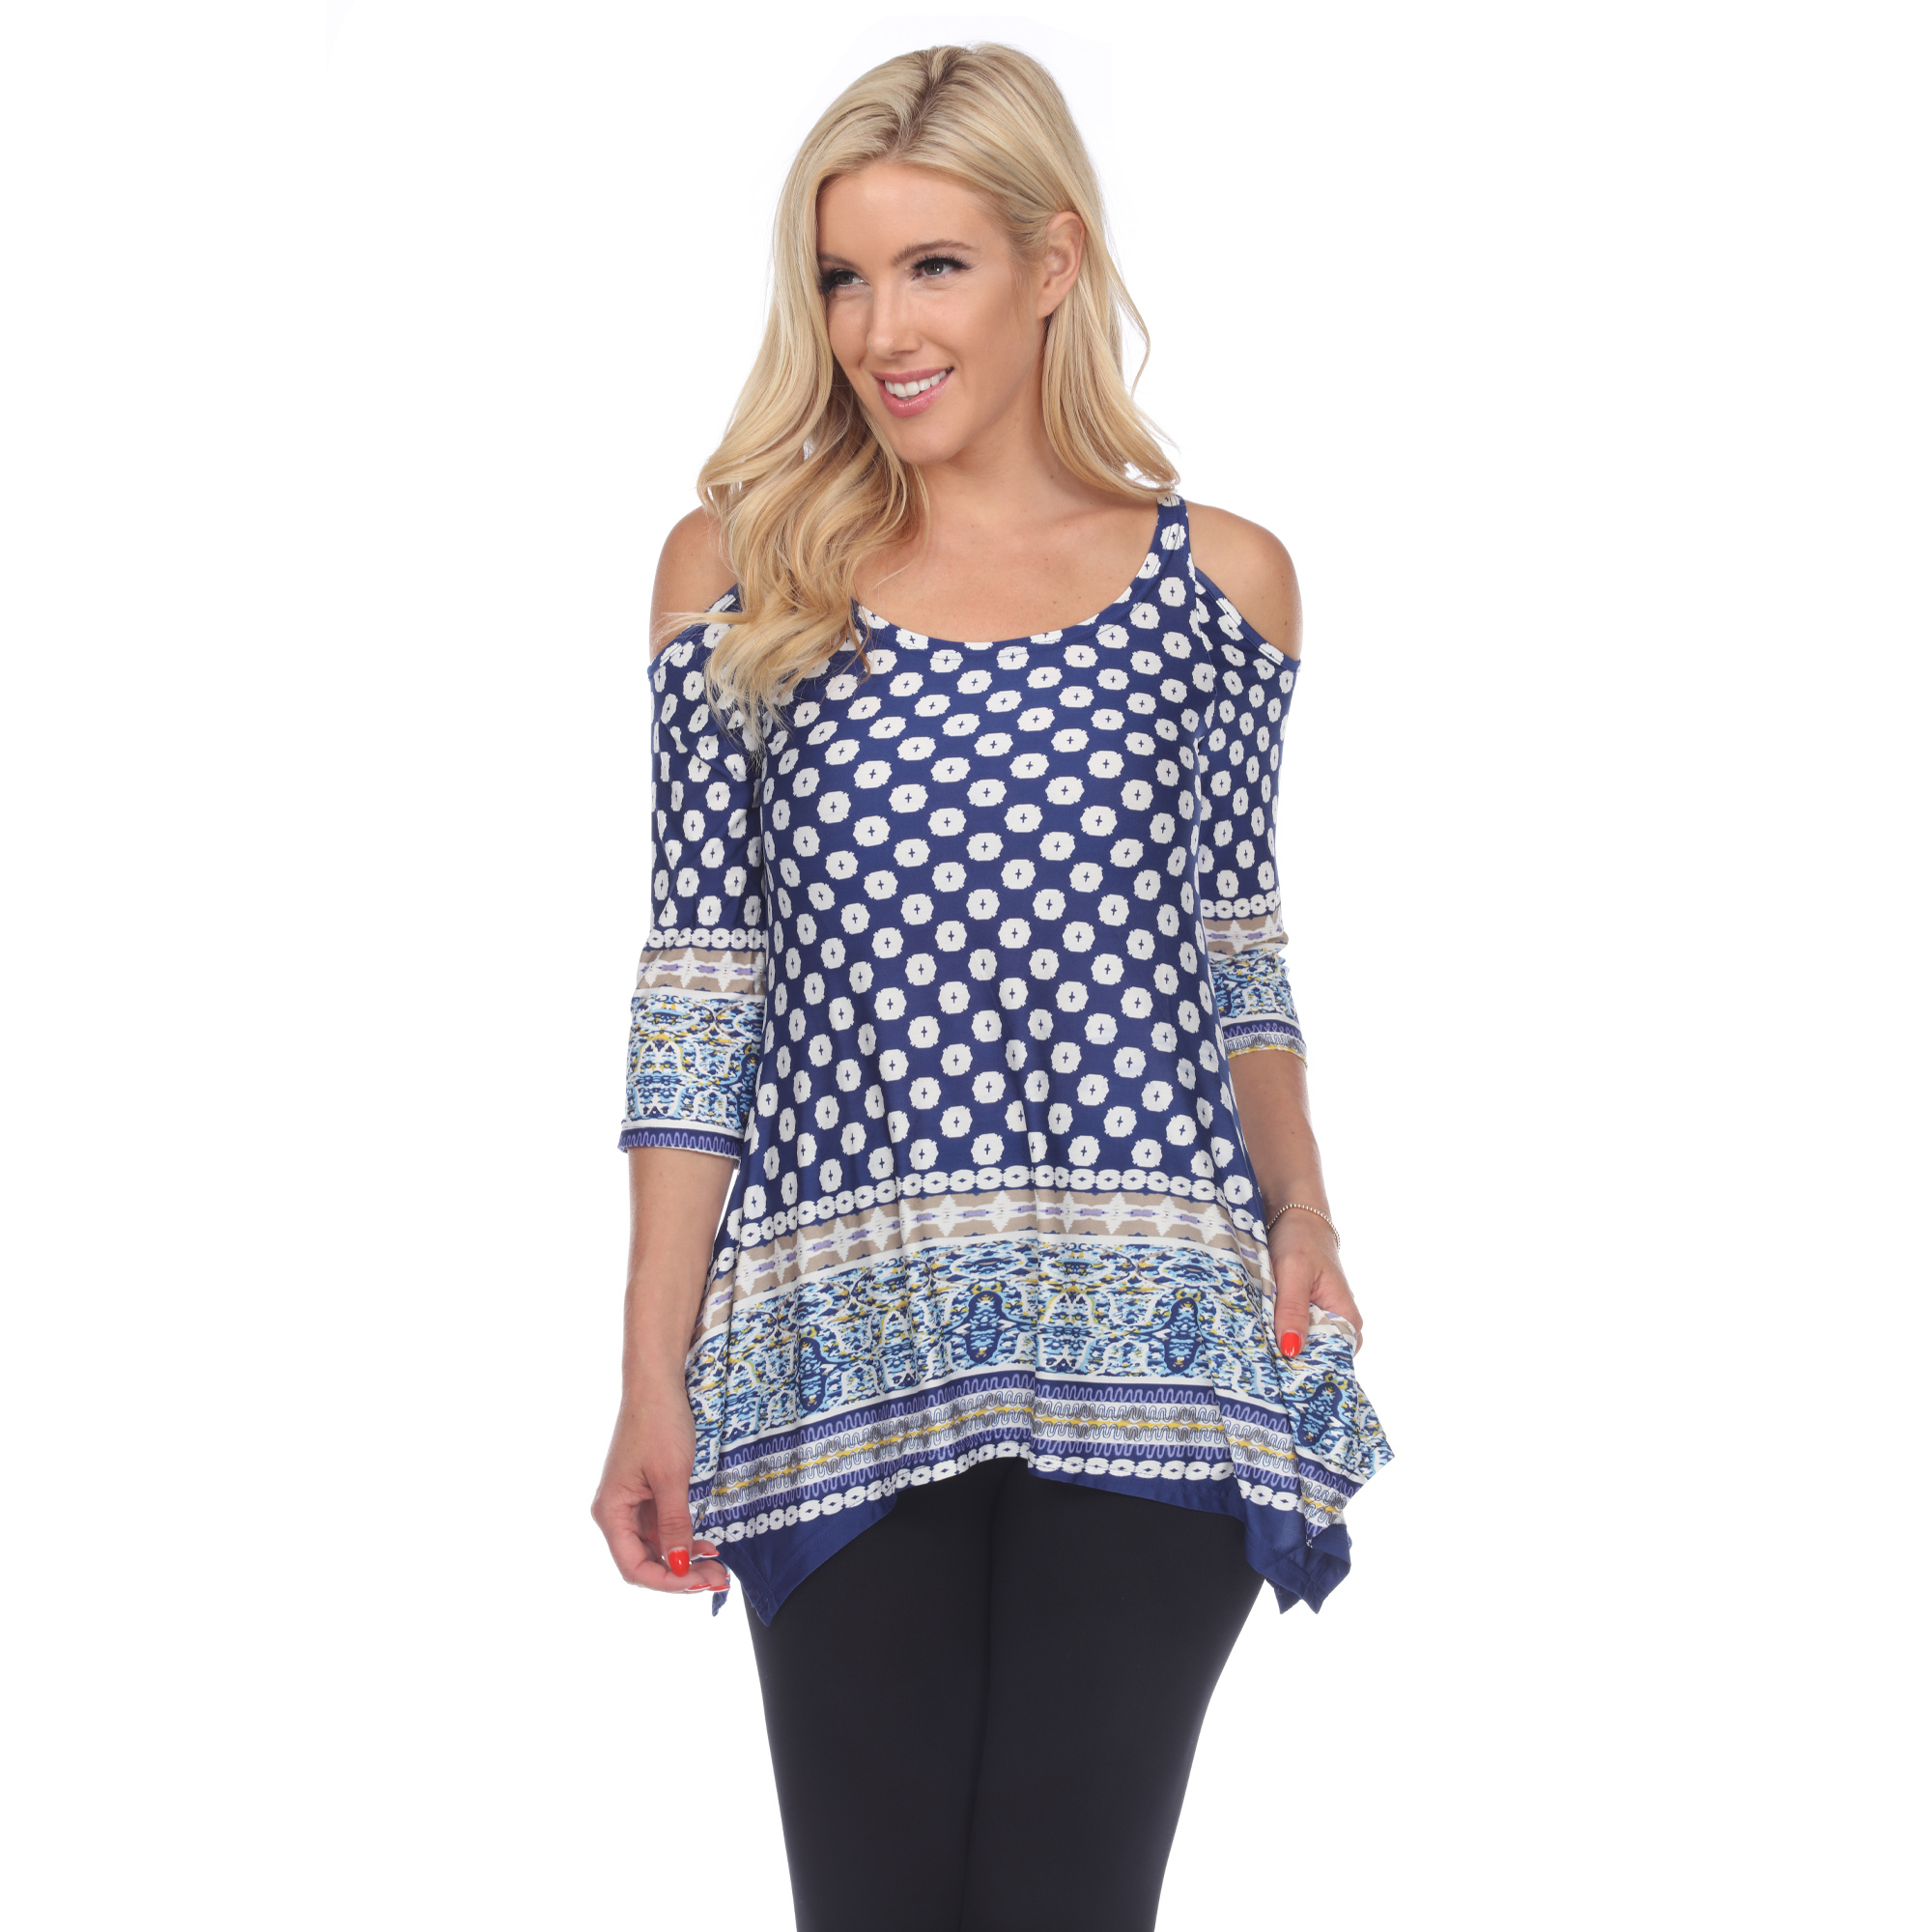 White Mark Women's Cold Shoulder Quarter Sleeve Printed Tunic Top With Pockets - Navy/White Polka Dots, 2X